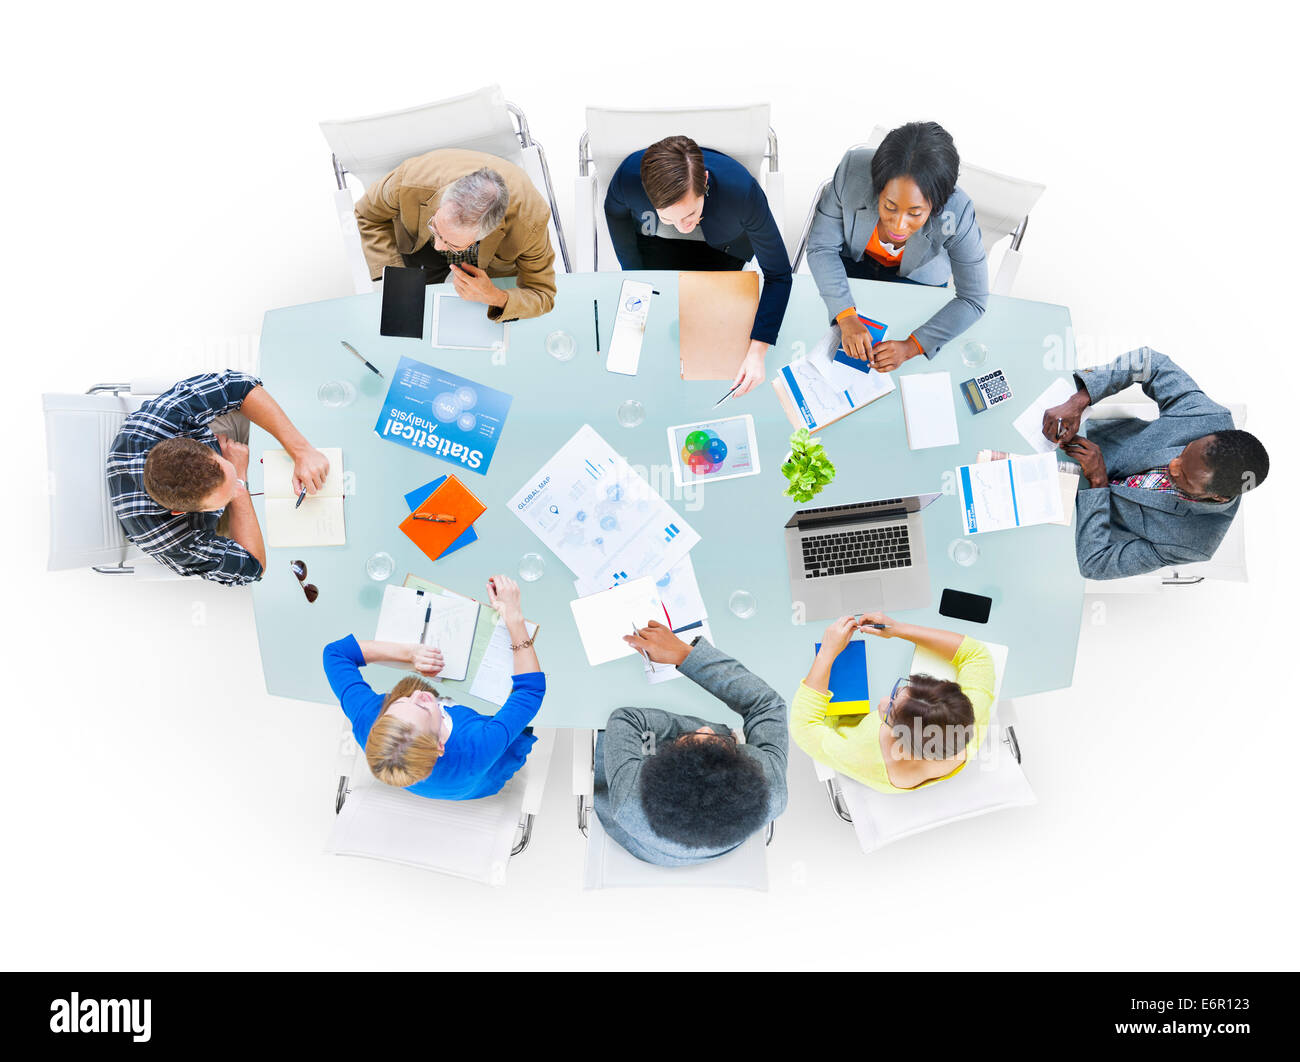 Group of Business People Discussing Business Issues Stock Photo